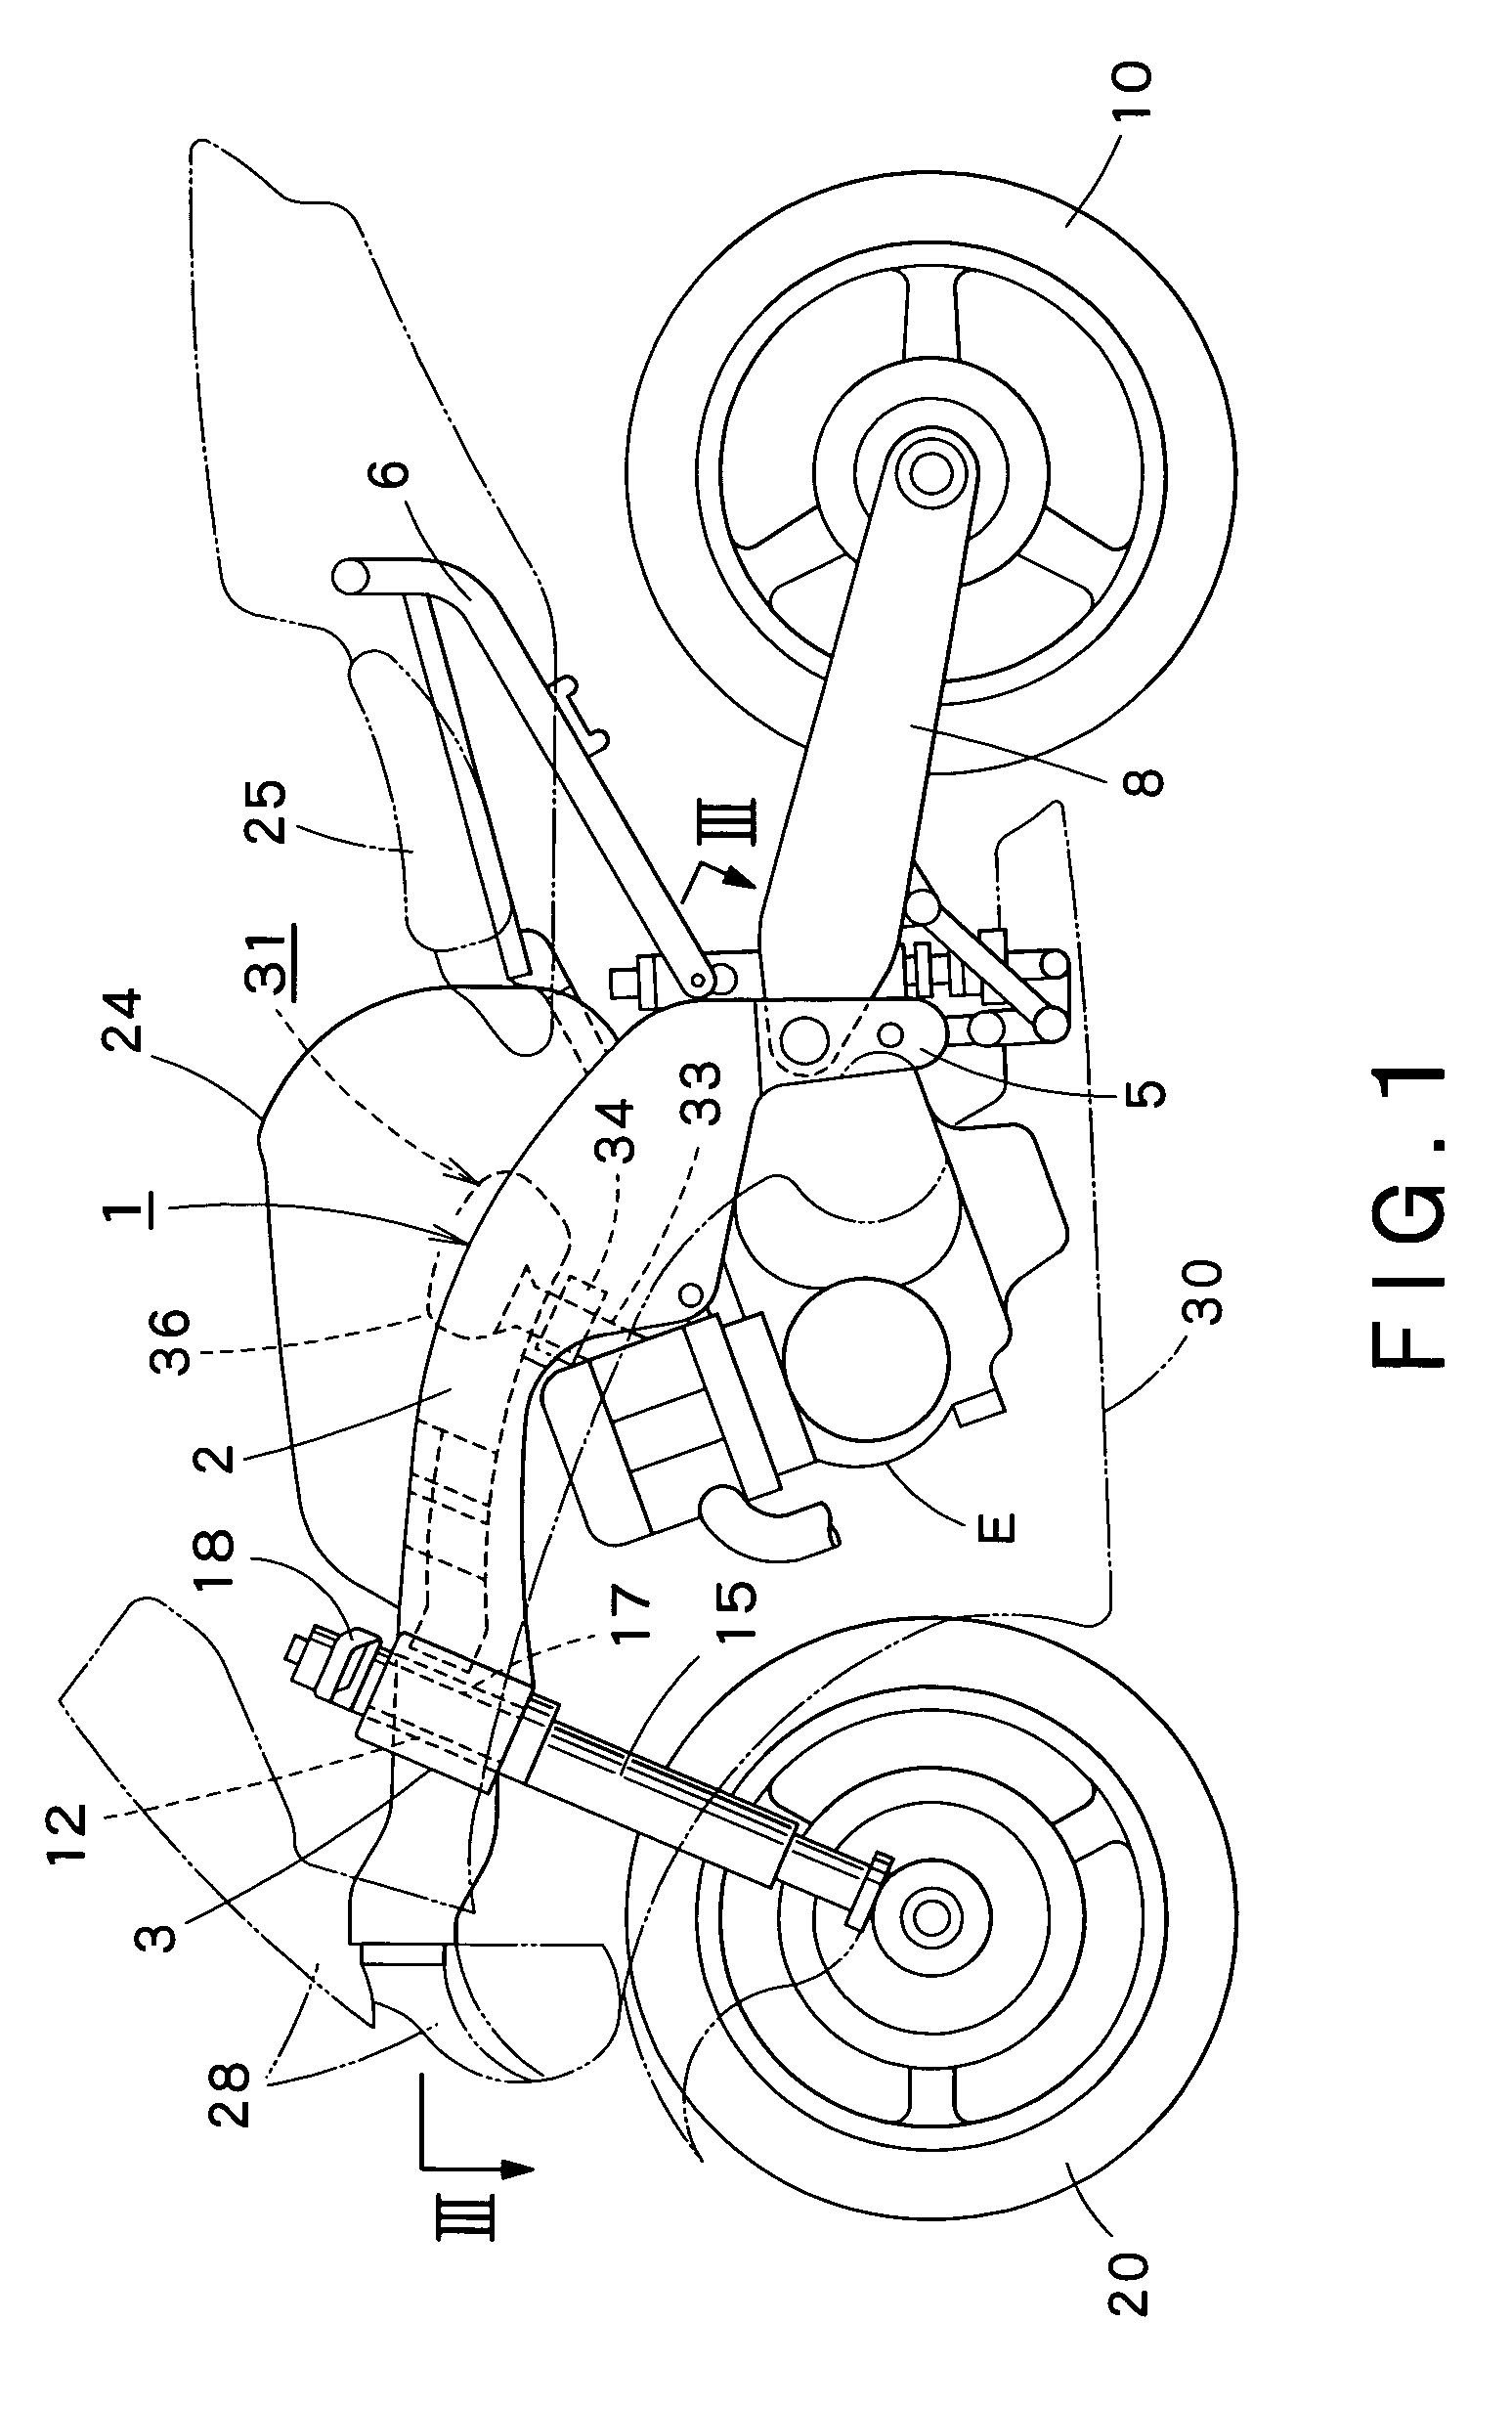 Air intake structure for motorcycle